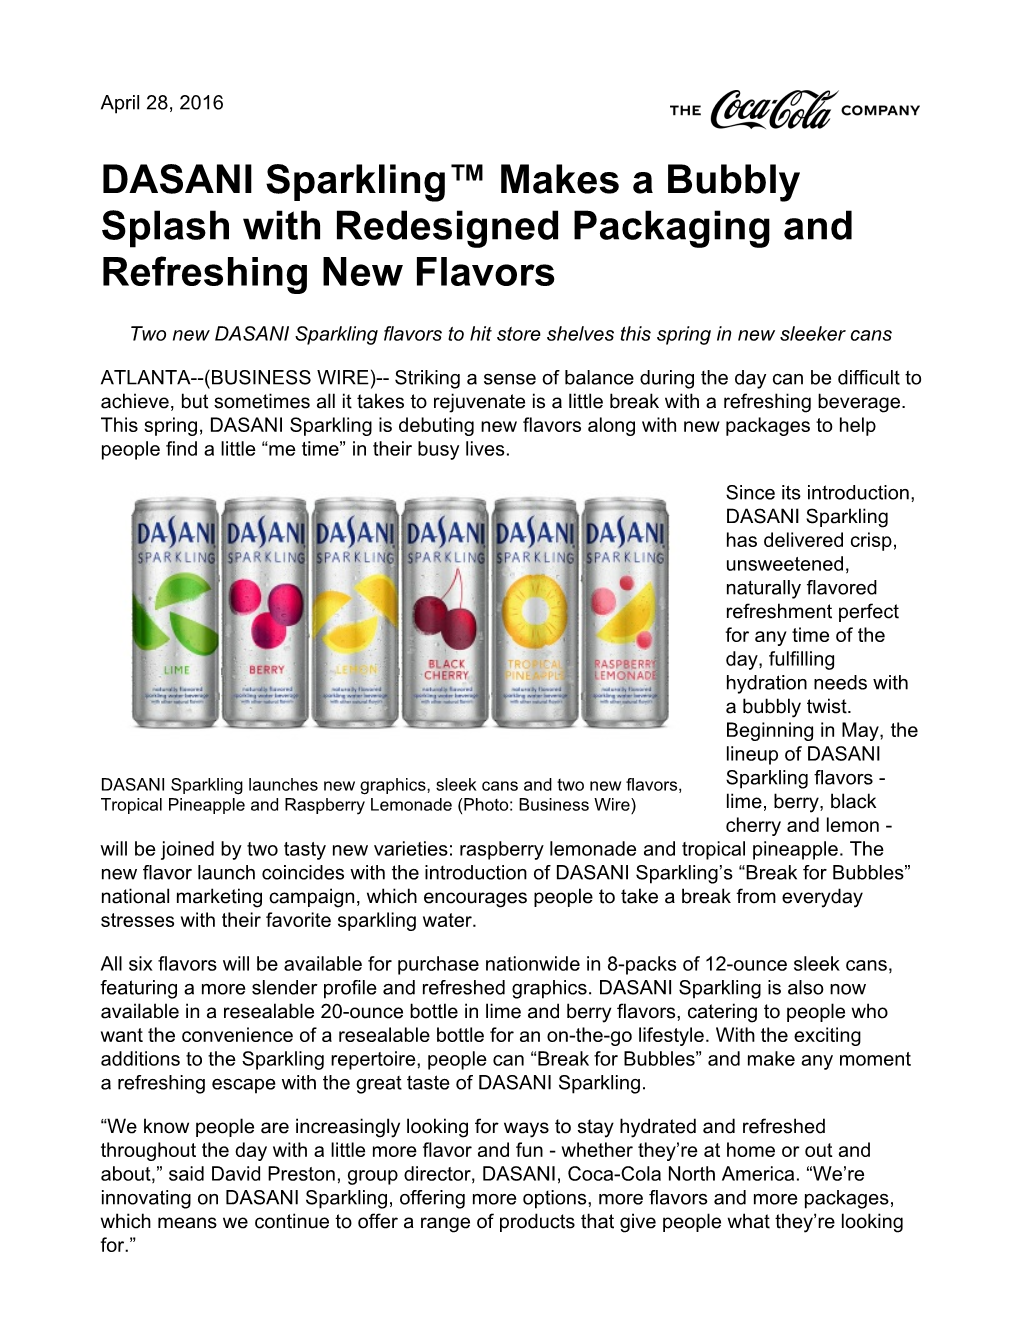 DASANI Sparkling™ Makes a Bubbly Splash with Redesigned Packaging and Refreshing New Flavors